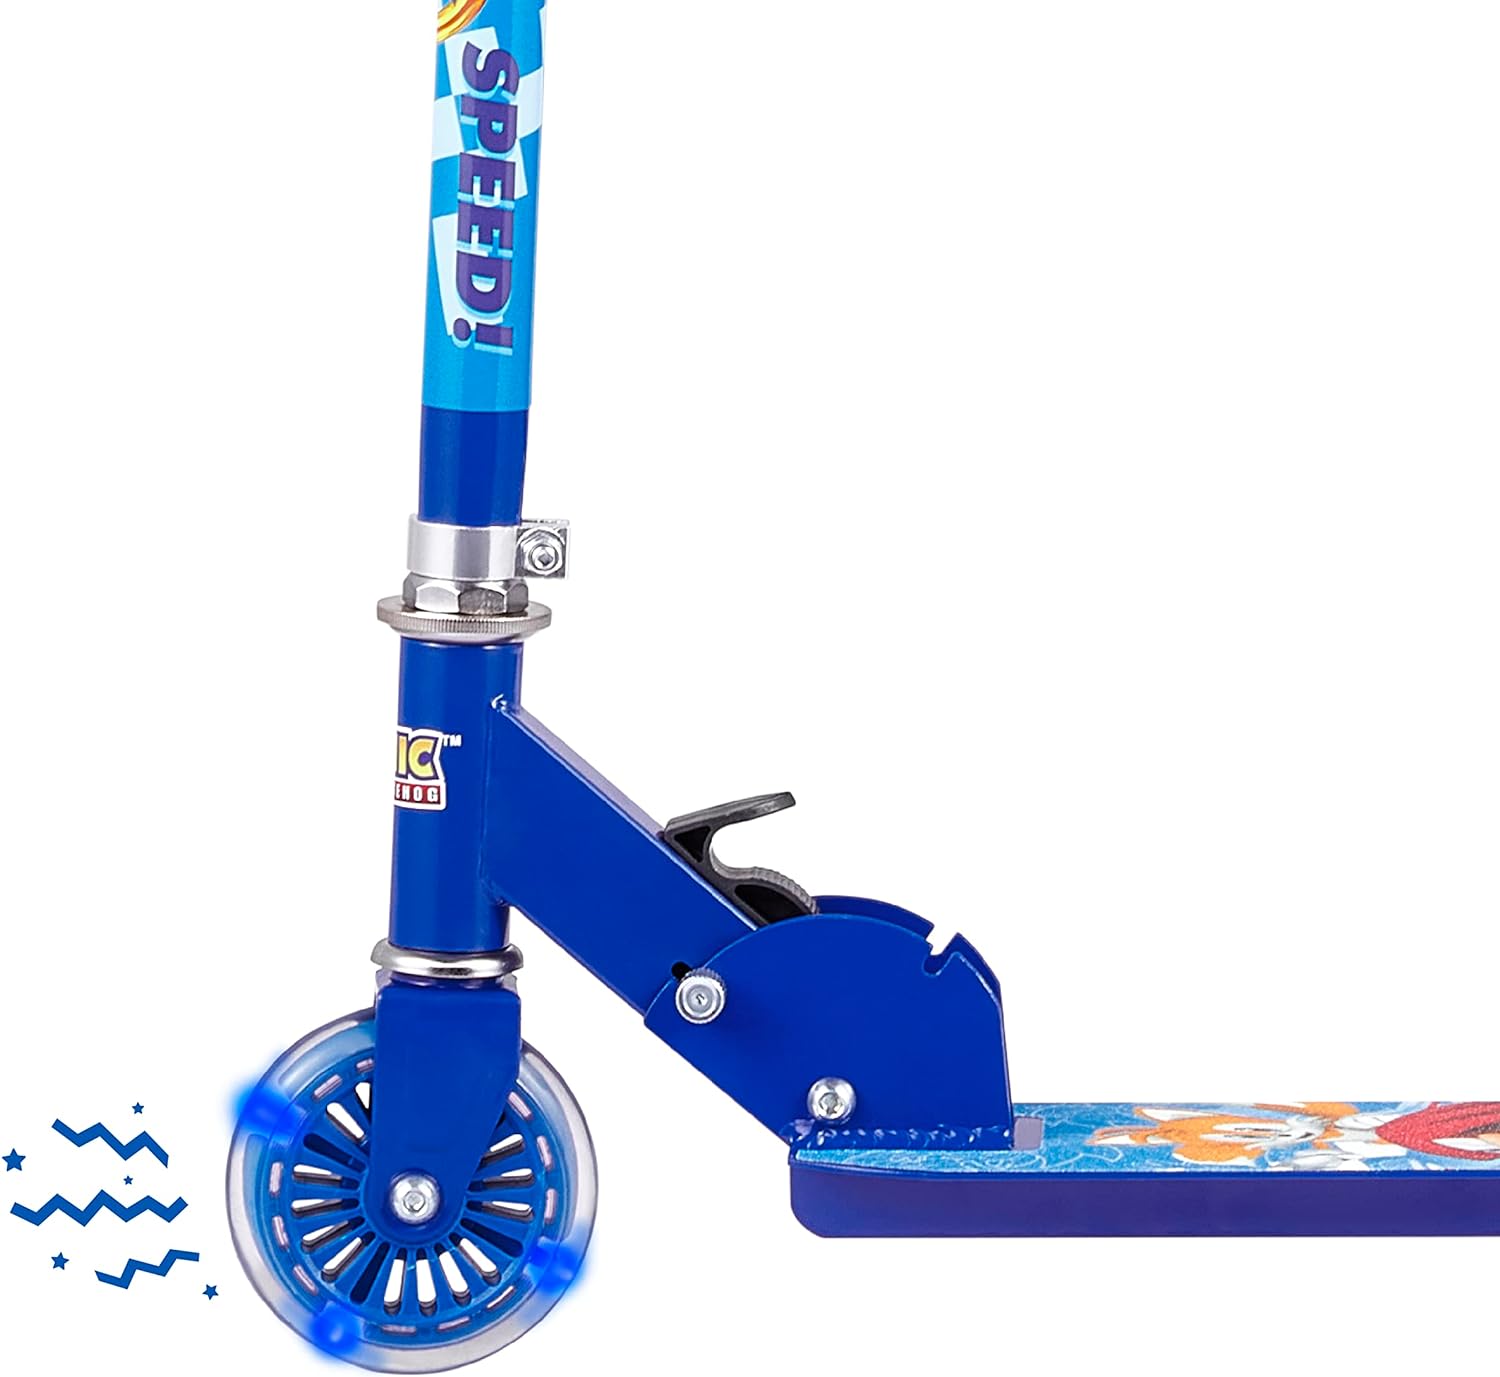 2 Wheel Kick Scooter for Kids - Easy & Portable Fold-N-Carry Design, Ultra-Lightweight, Comfortable & Safe, Durable & Easy to Ride